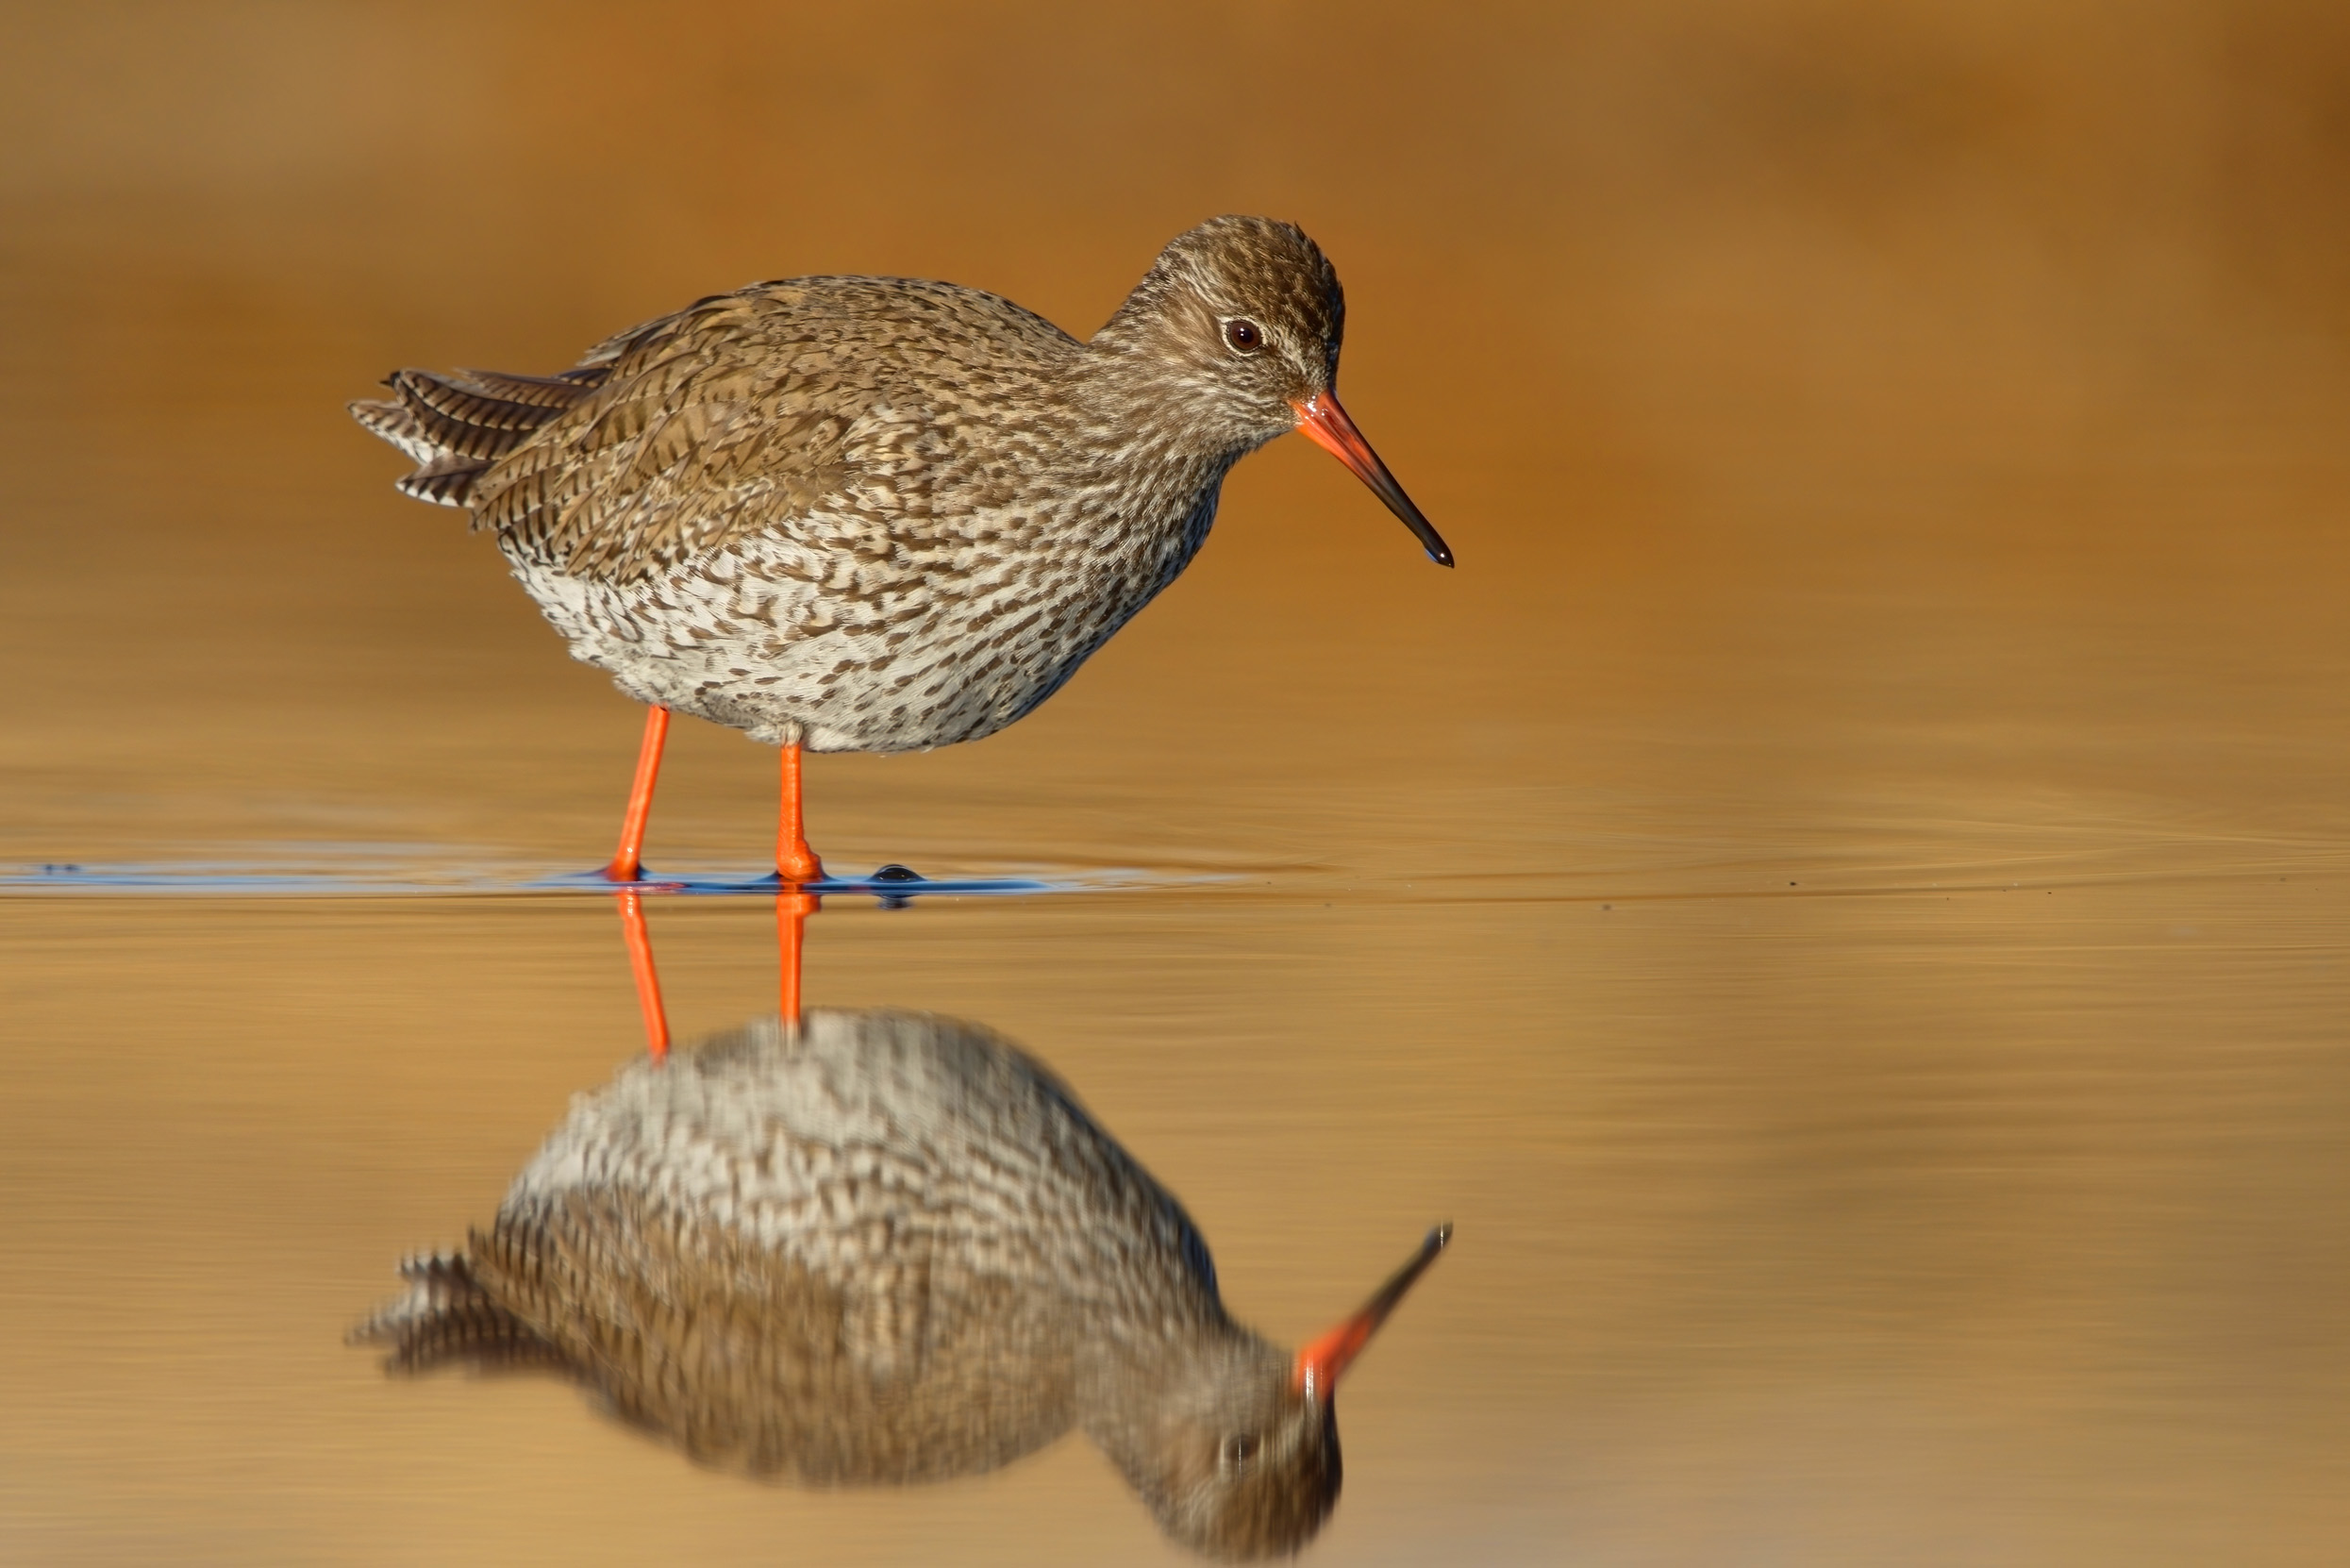 A Redshank wading in shallow water looking at it's reflection.